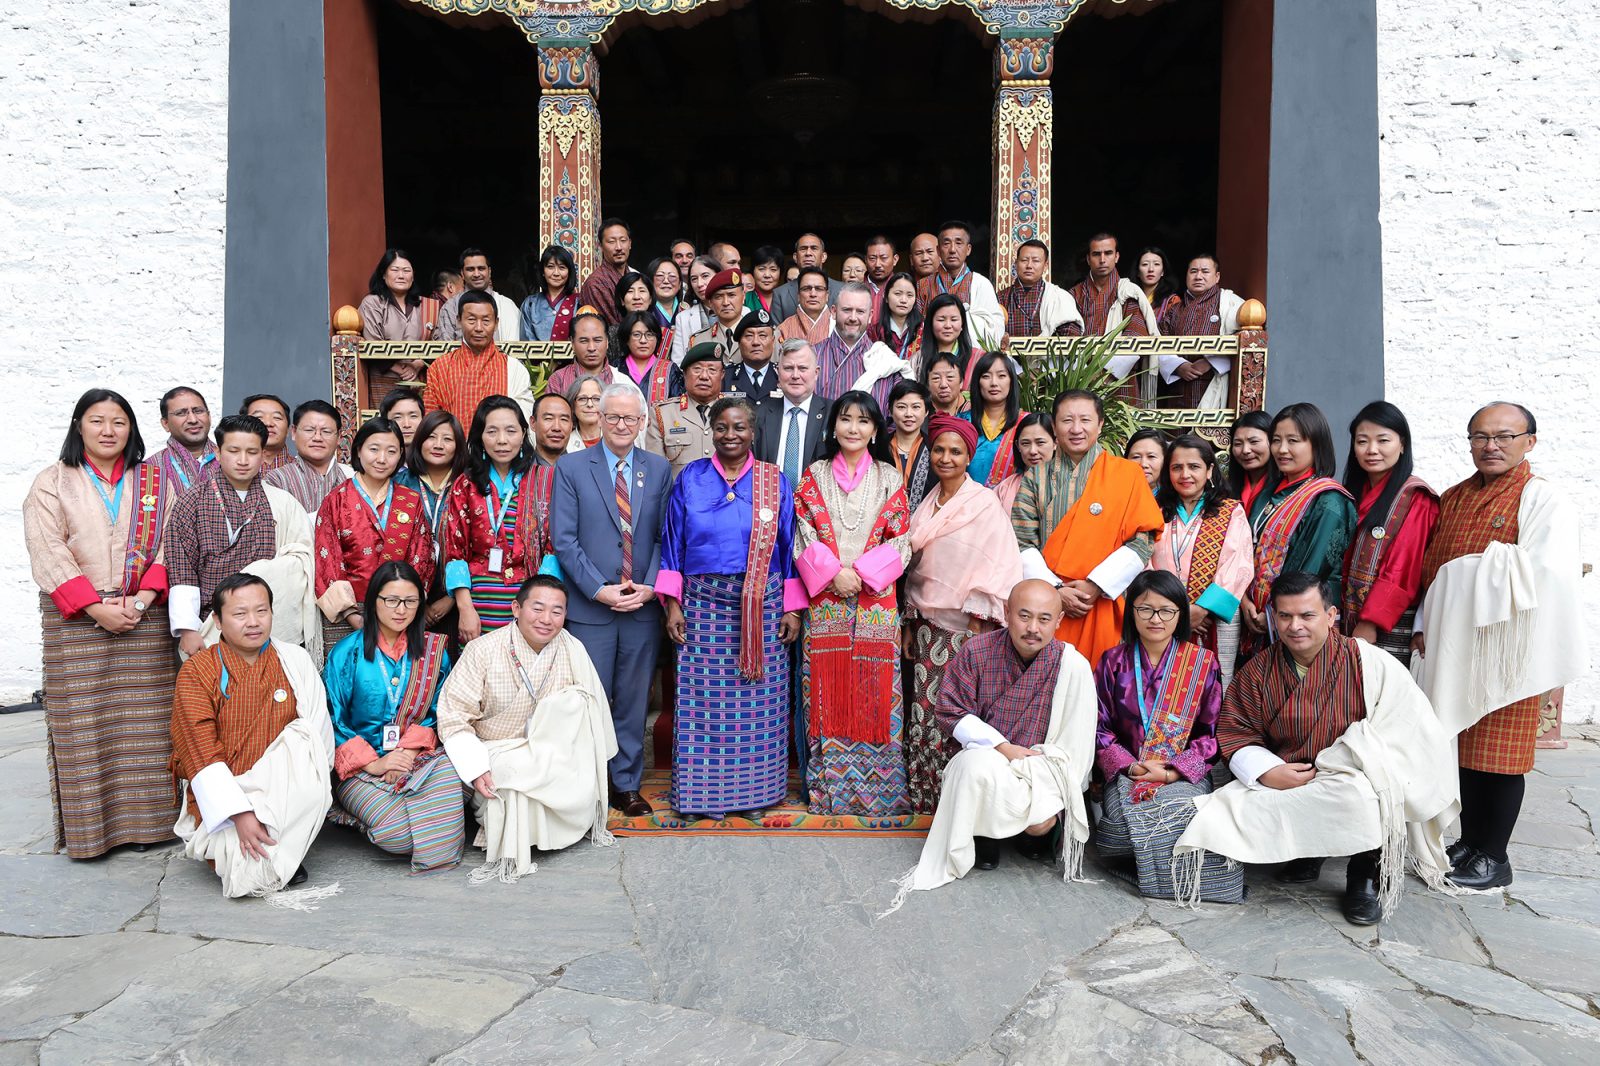 Celebrating 74 years of United Nations in Bhutan